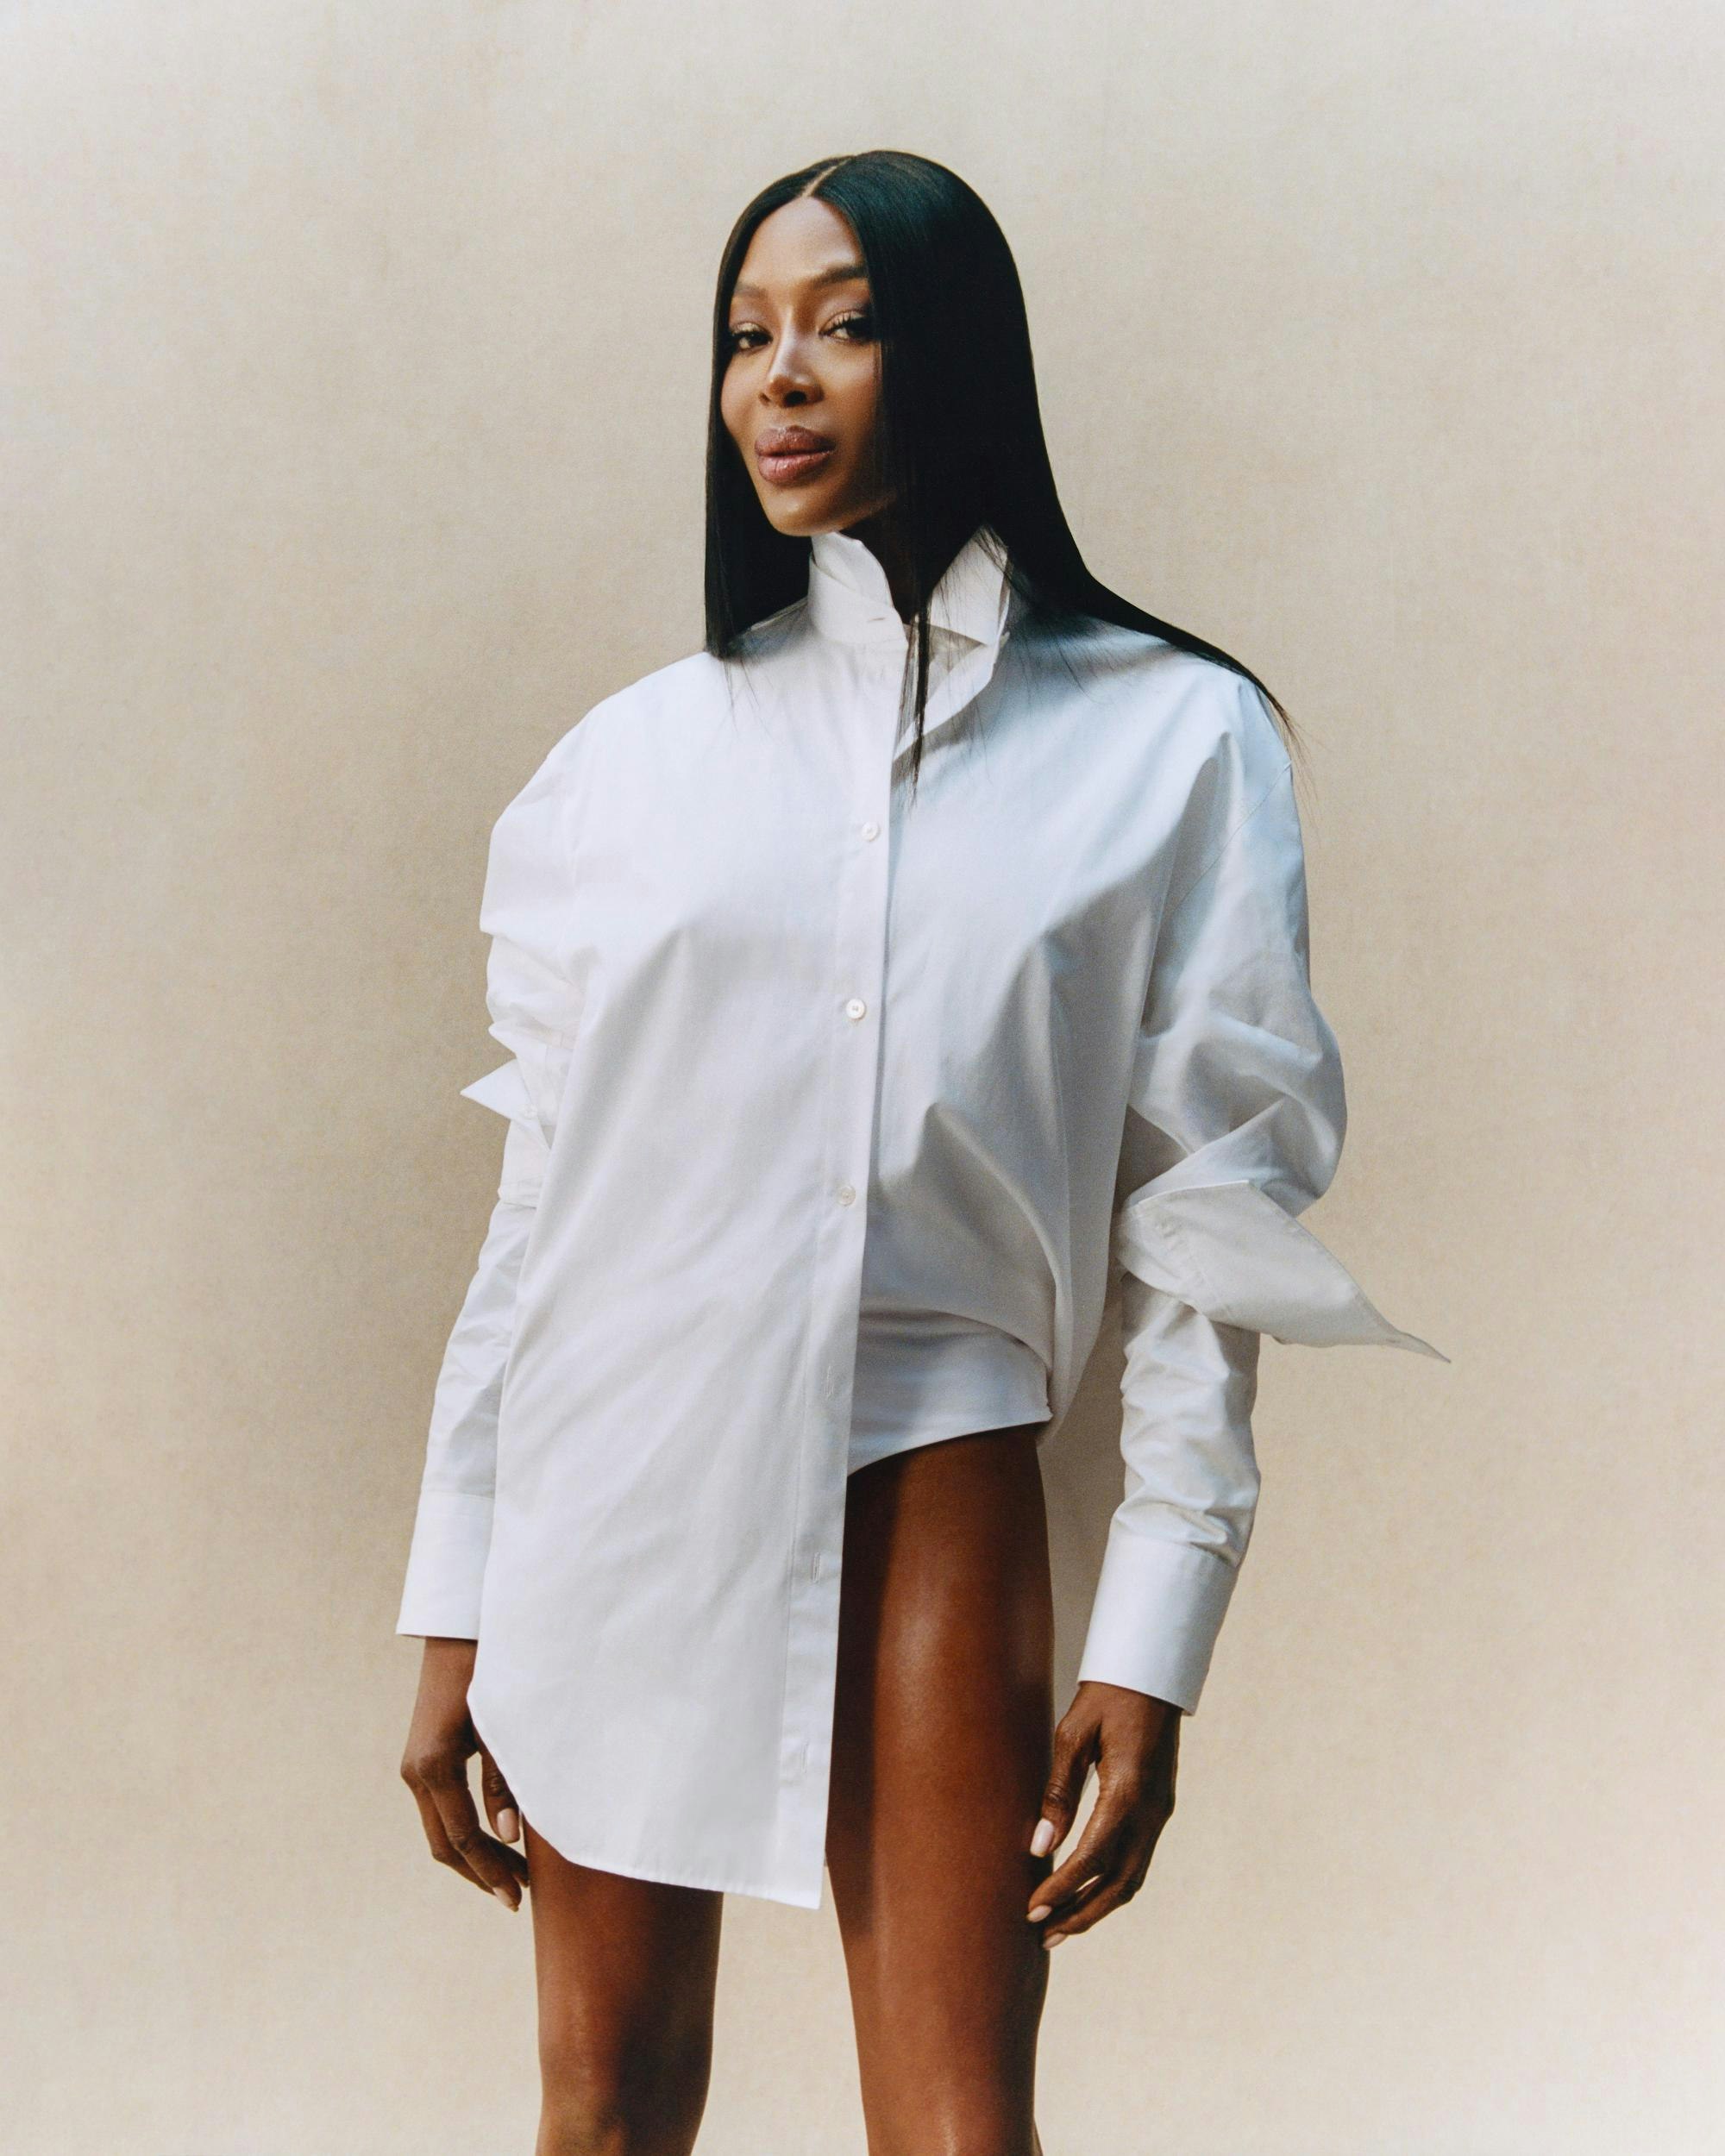 Naomi Campbell interview ELLE